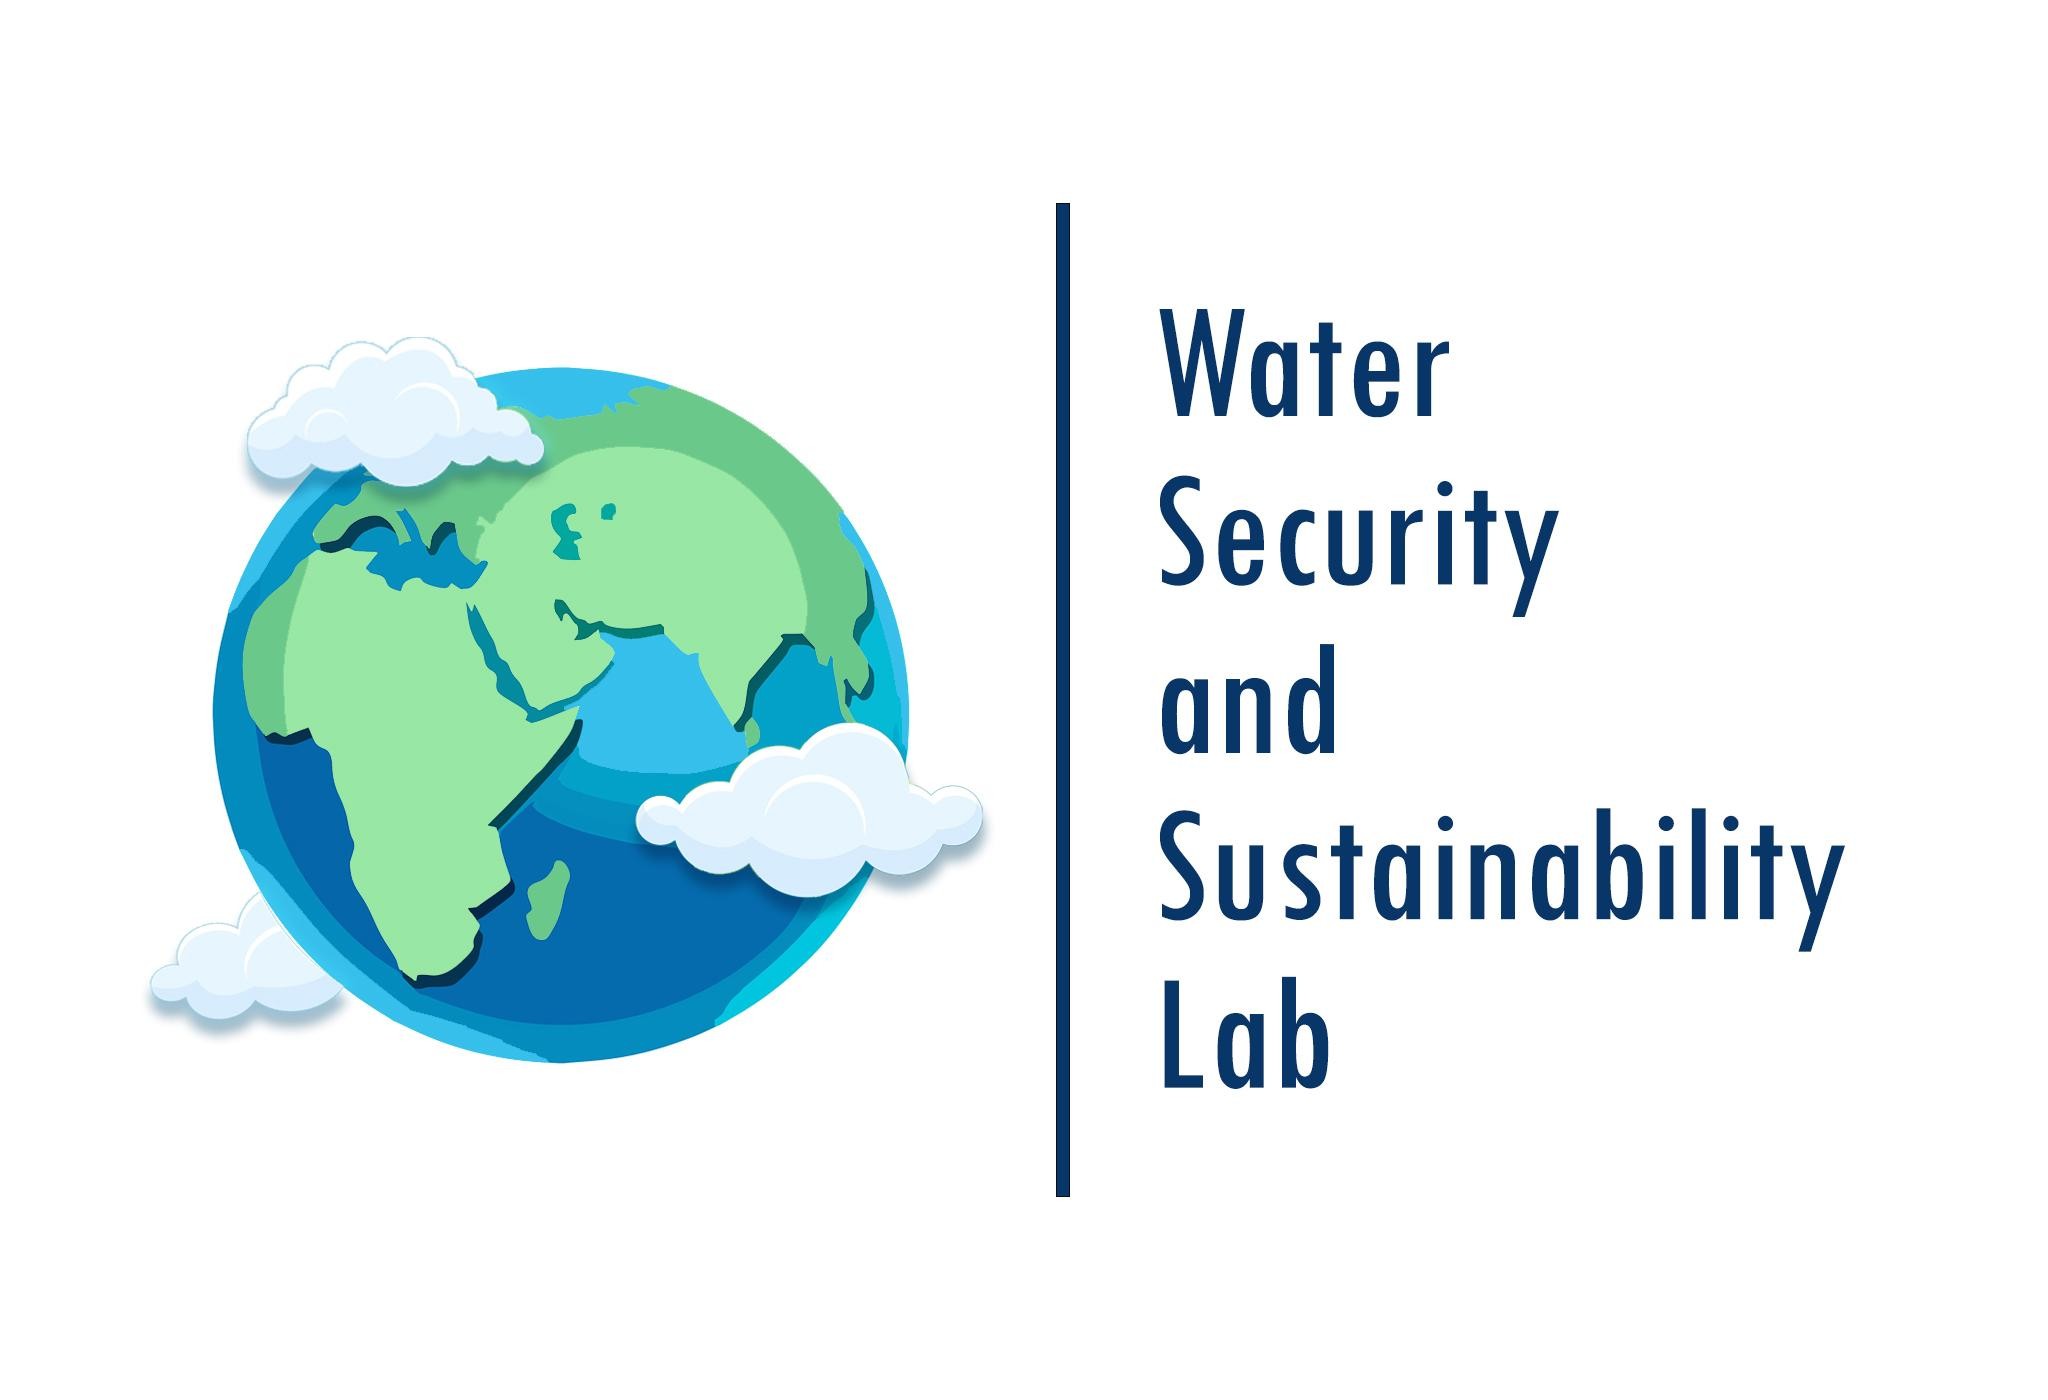 Water Security and Sustainability Lab